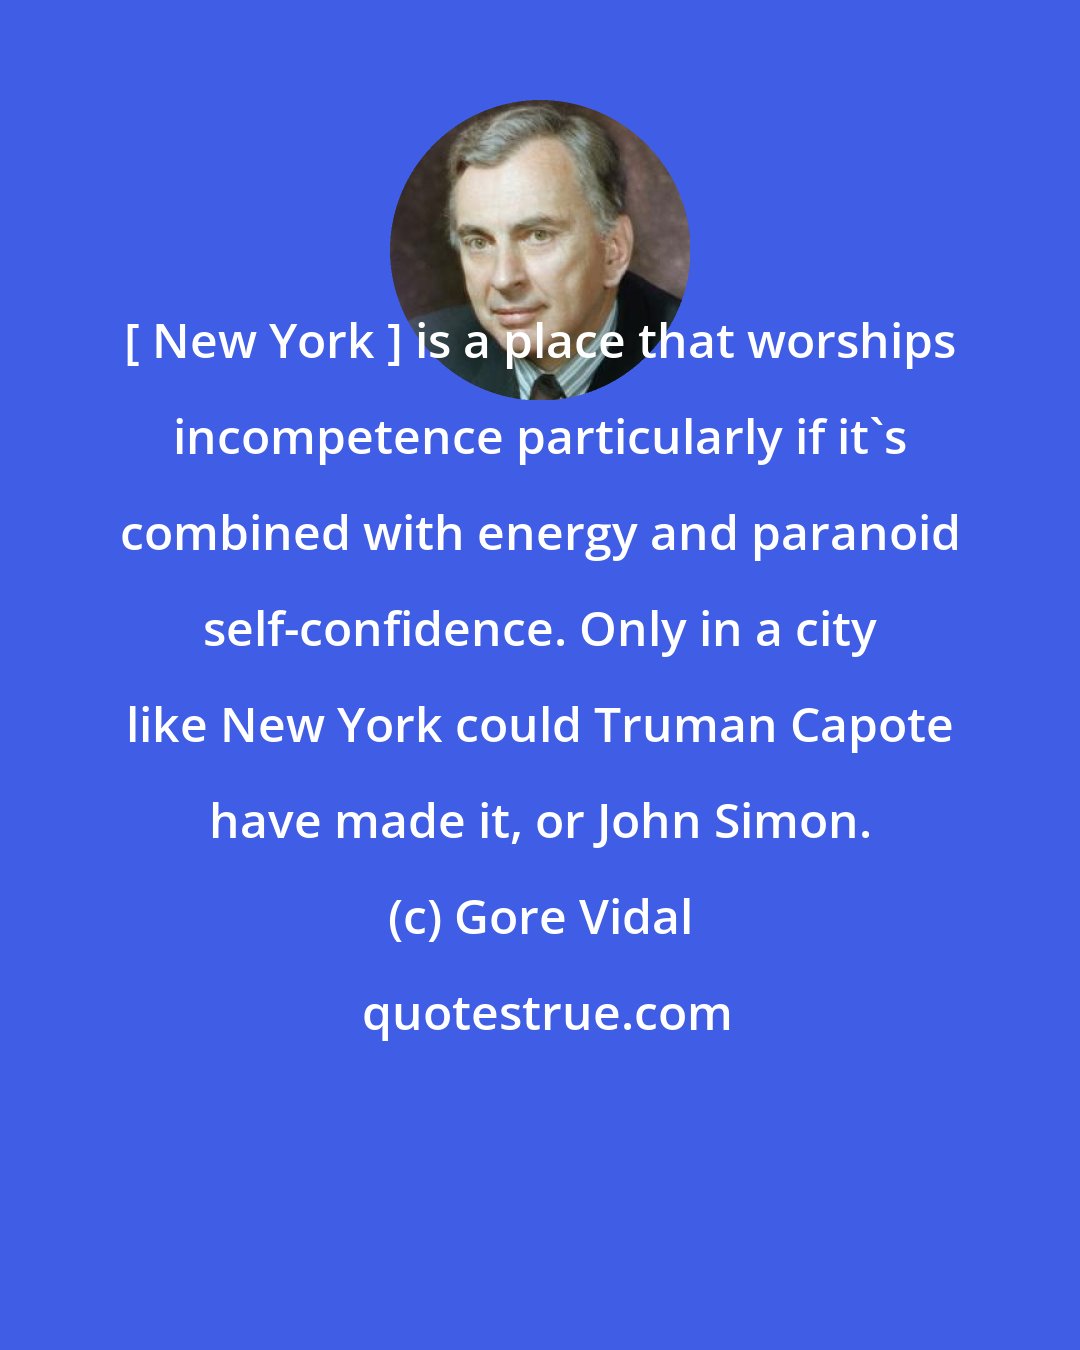 Gore Vidal: [ New York ] is a place that worships incompetence particularly if it's combined with energy and paranoid self-confidence. Only in a city like New York could Truman Capote have made it, or John Simon.